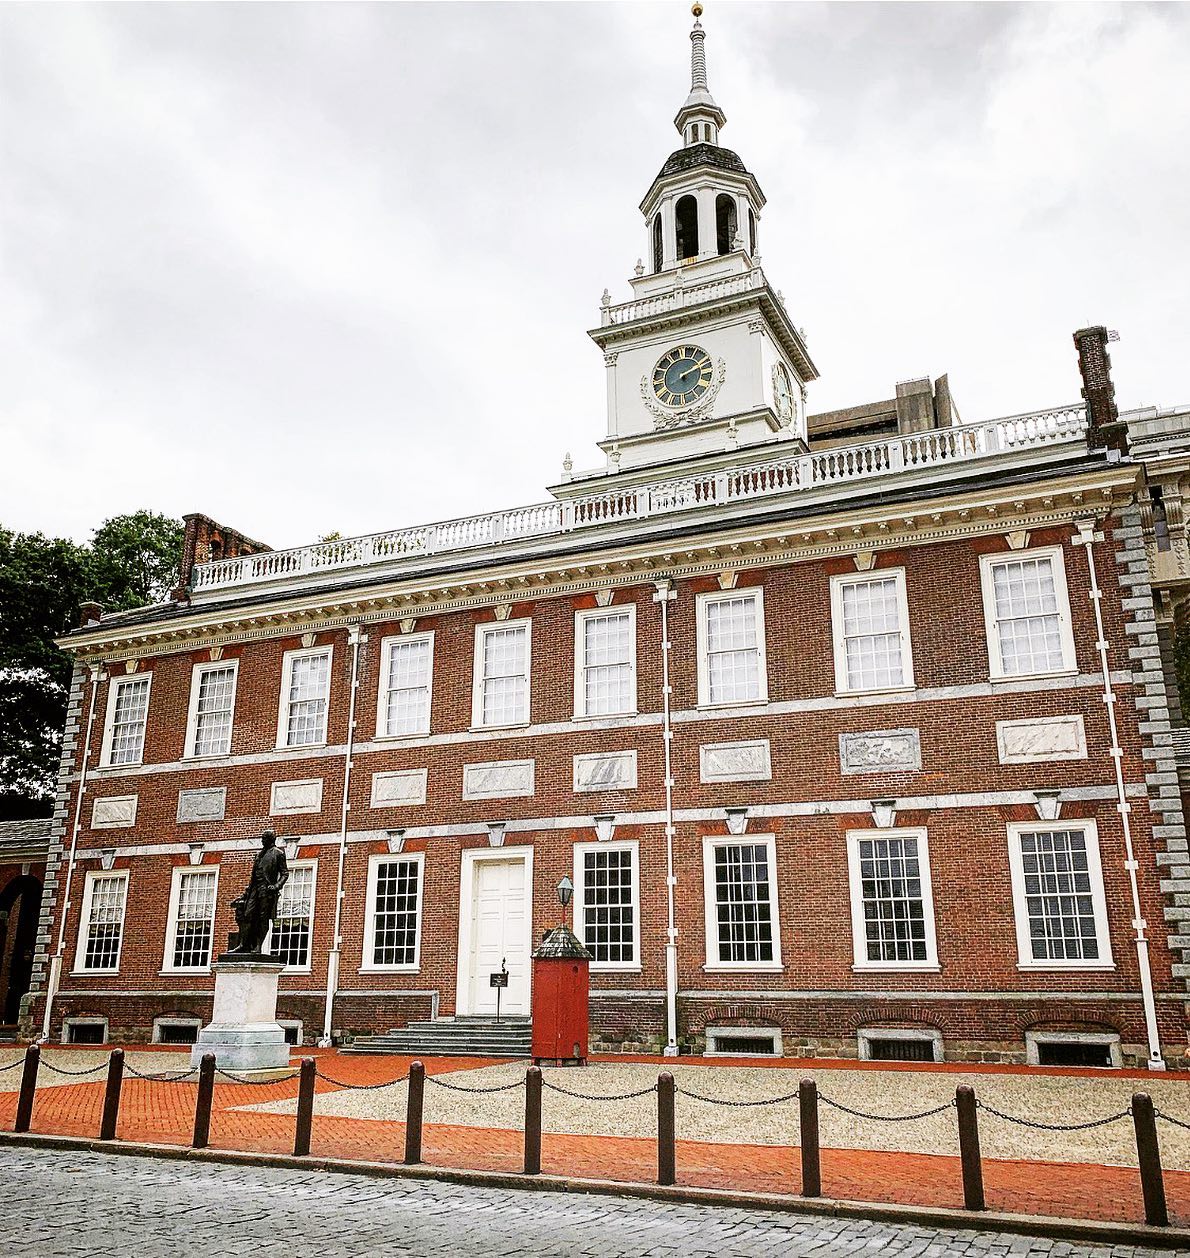 Independence Hall is the building where both the United States Declaration of Independence and the United States Constitution were debated and adopted.
.
It is now the centerpiece of the Independence National Historical Park in Philadelphia, Pennsylvania.
.
.
#independencehall #philadelphia #pennsylvania #independence #hall #1776 #declarationofindependence #4thjuly #philly #libertybell #liberty #us #unitedstates #usa #america #travel #travelblogger #instatravel #instagram @independencehall